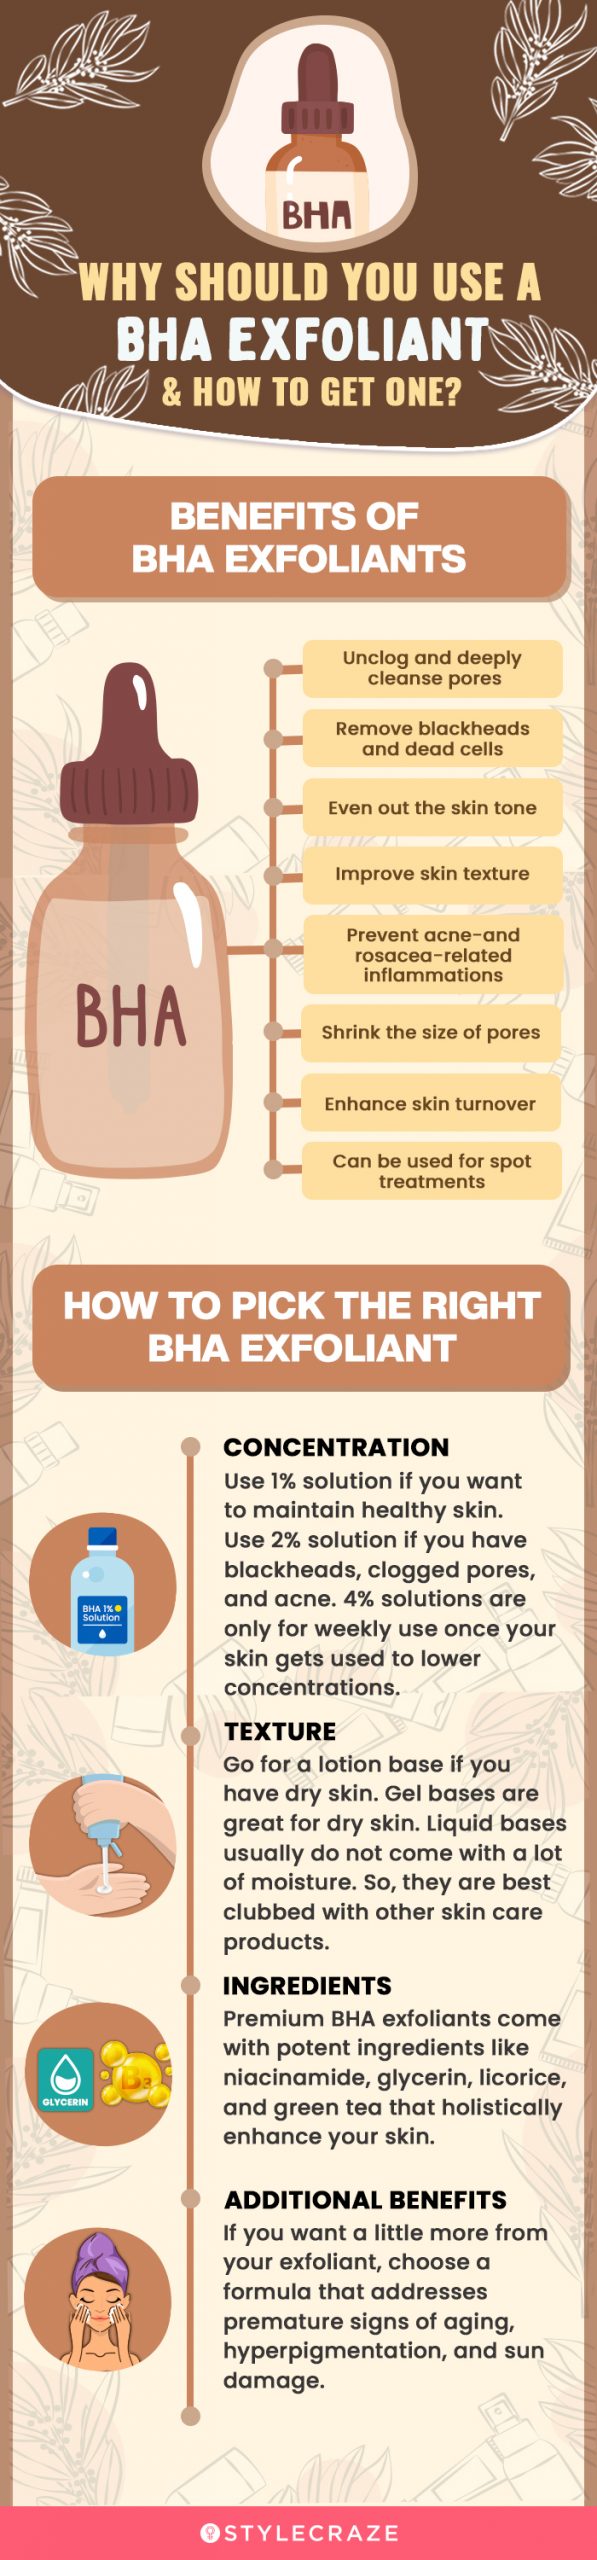 Why Should You Use A BHA Exfoliant & How To Get One? [infographic]